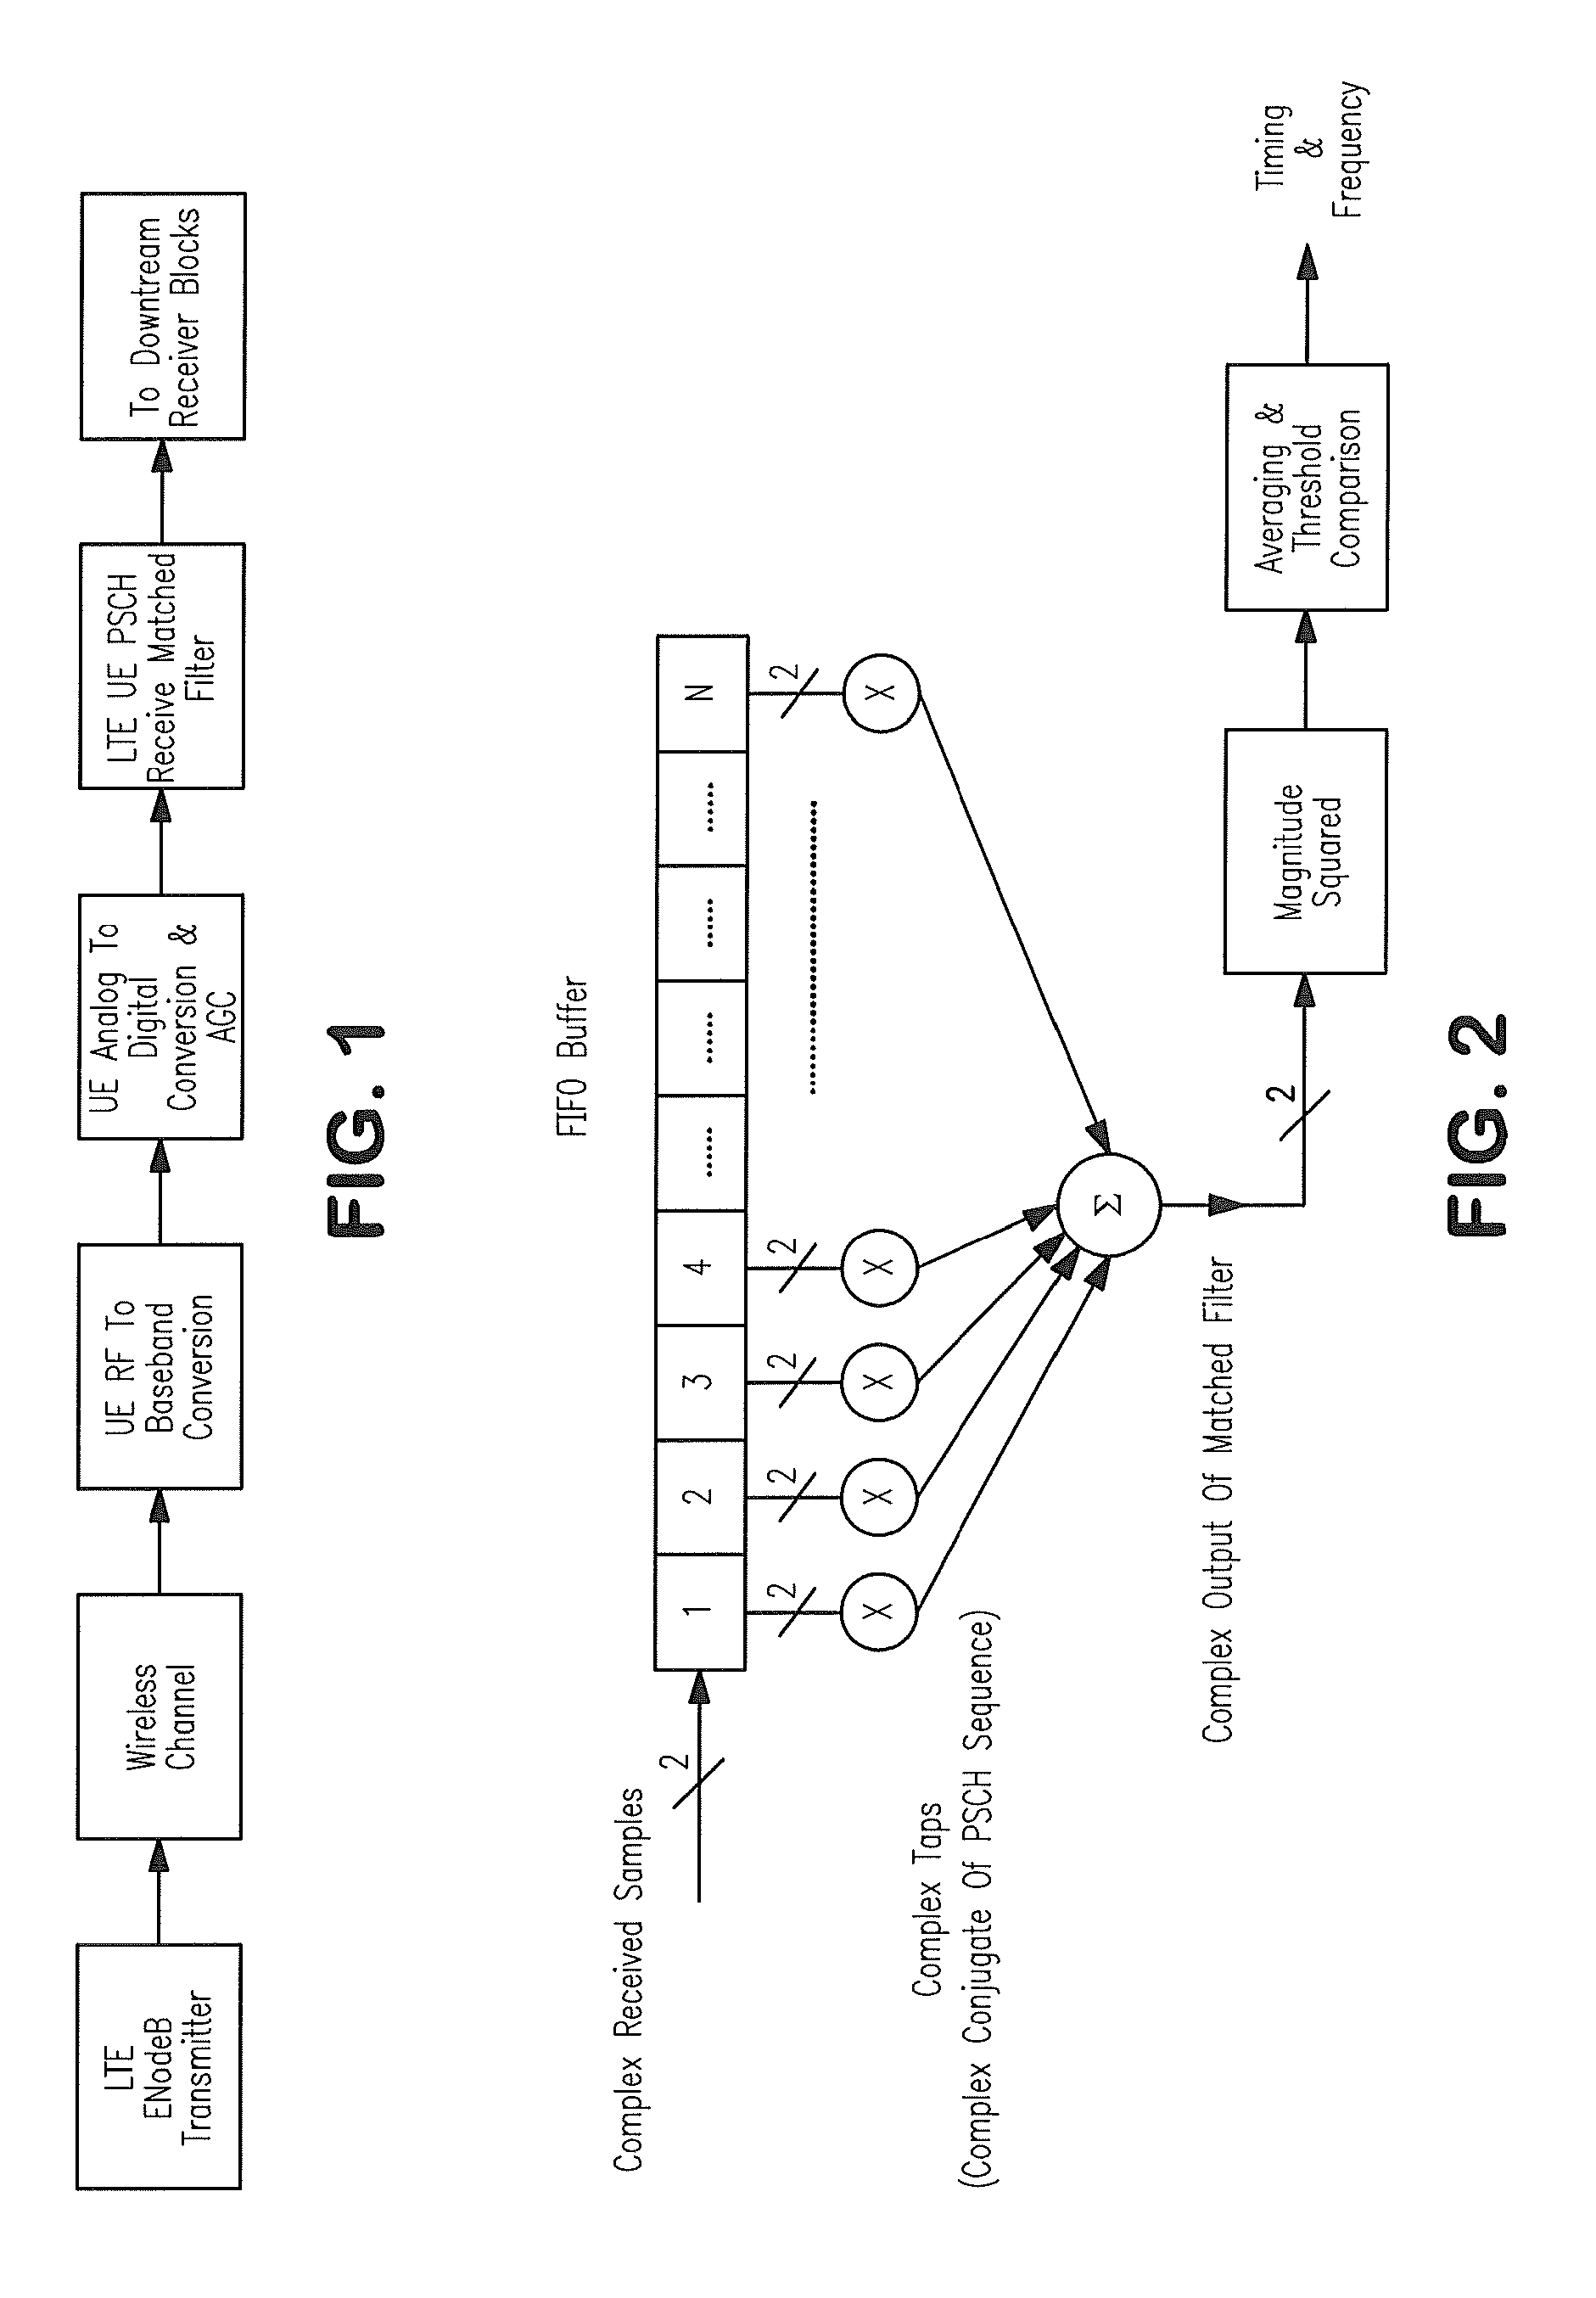 Method and apparatus for improved base station cell synchronization in LTE downlink